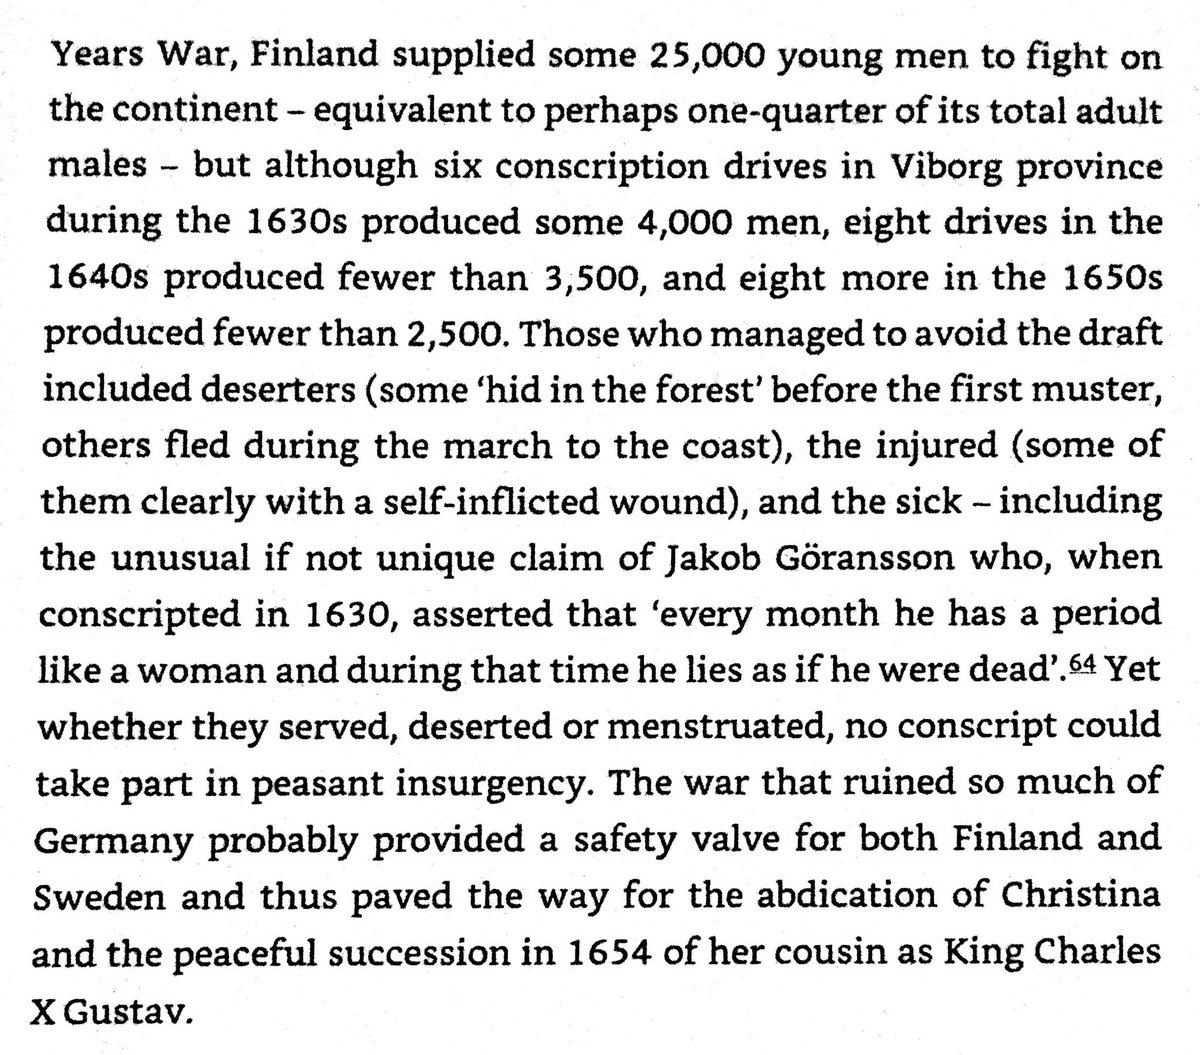 17th century Sweden was an extremely militarized society. 500,000 Swedish soldier died in war 1620-1719. Their overall population was roughly 1 million. After heavy losses in 30s Years War, there were perhaps 9 Swedish women for every 5 Swedish men.